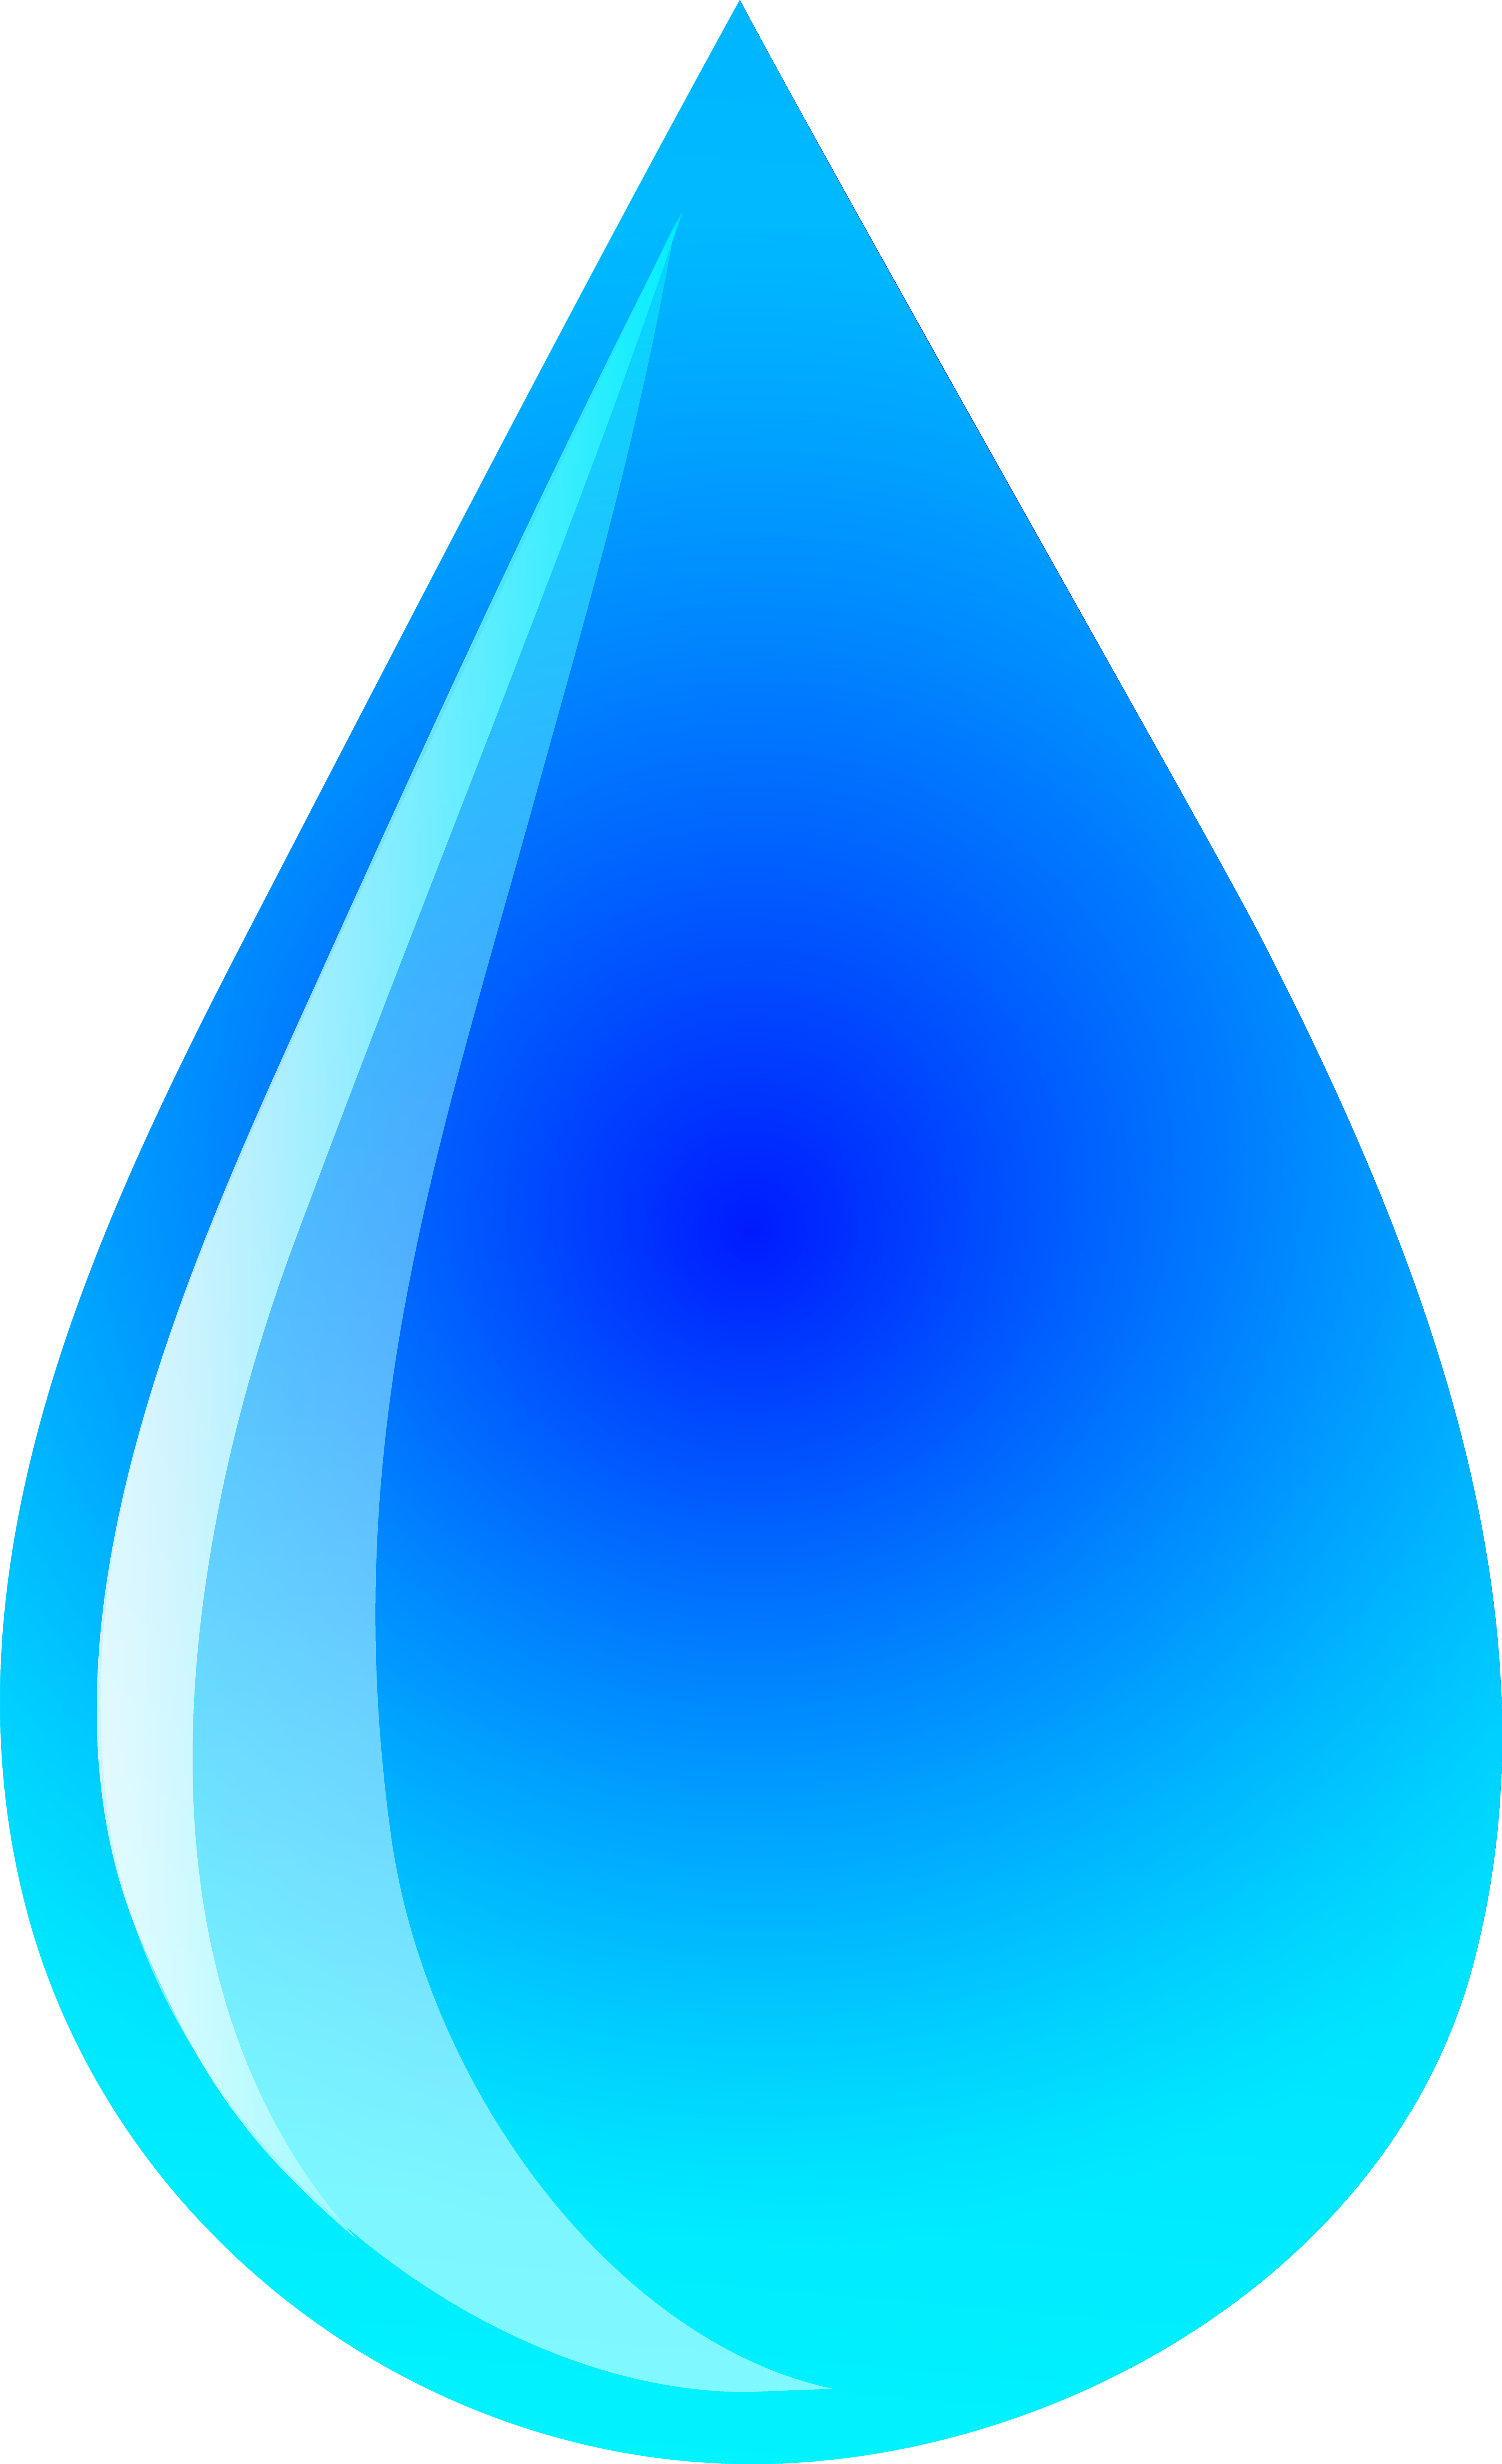 Water Drop Graphic